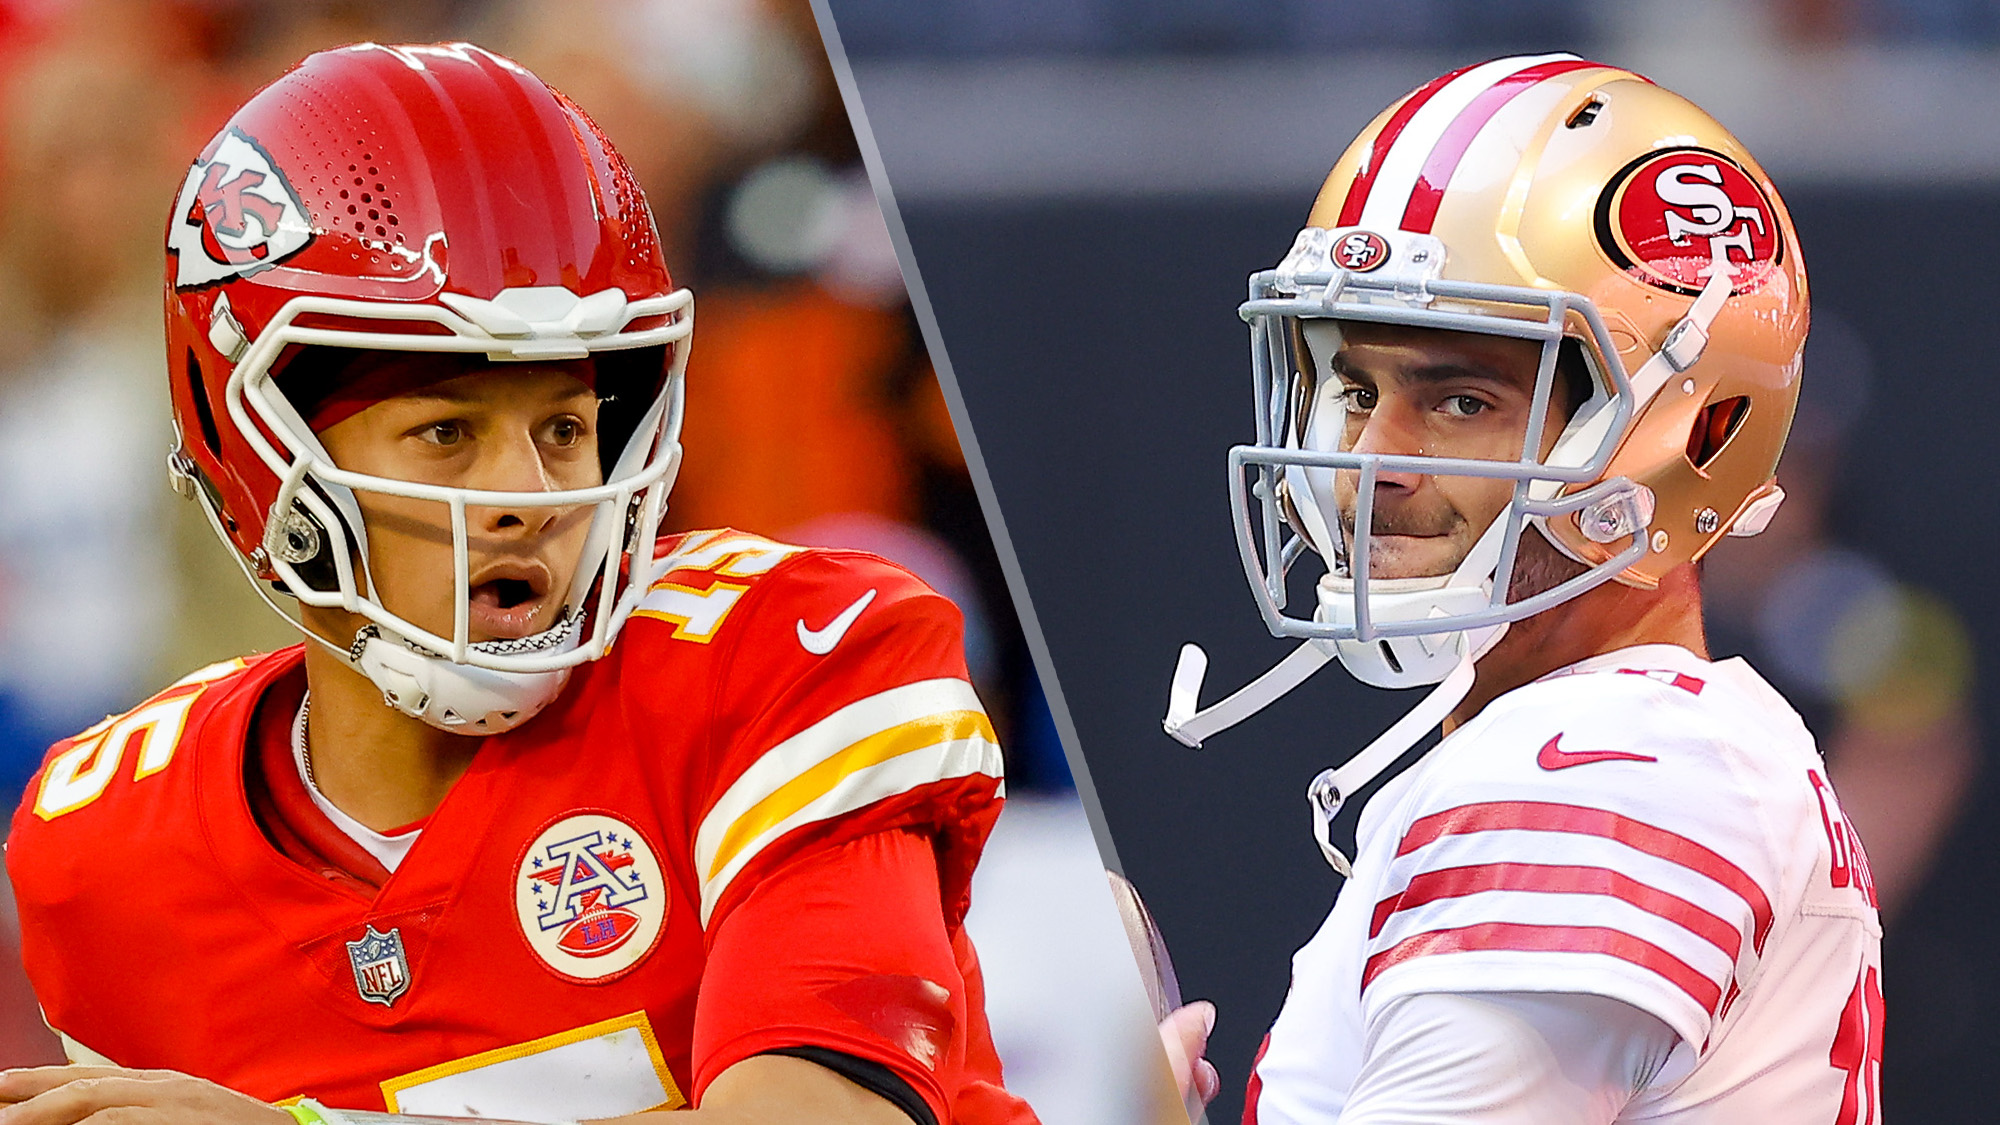 Chiefs vs 49ers live stream is today: How to watch NFL game online, start  time and channel